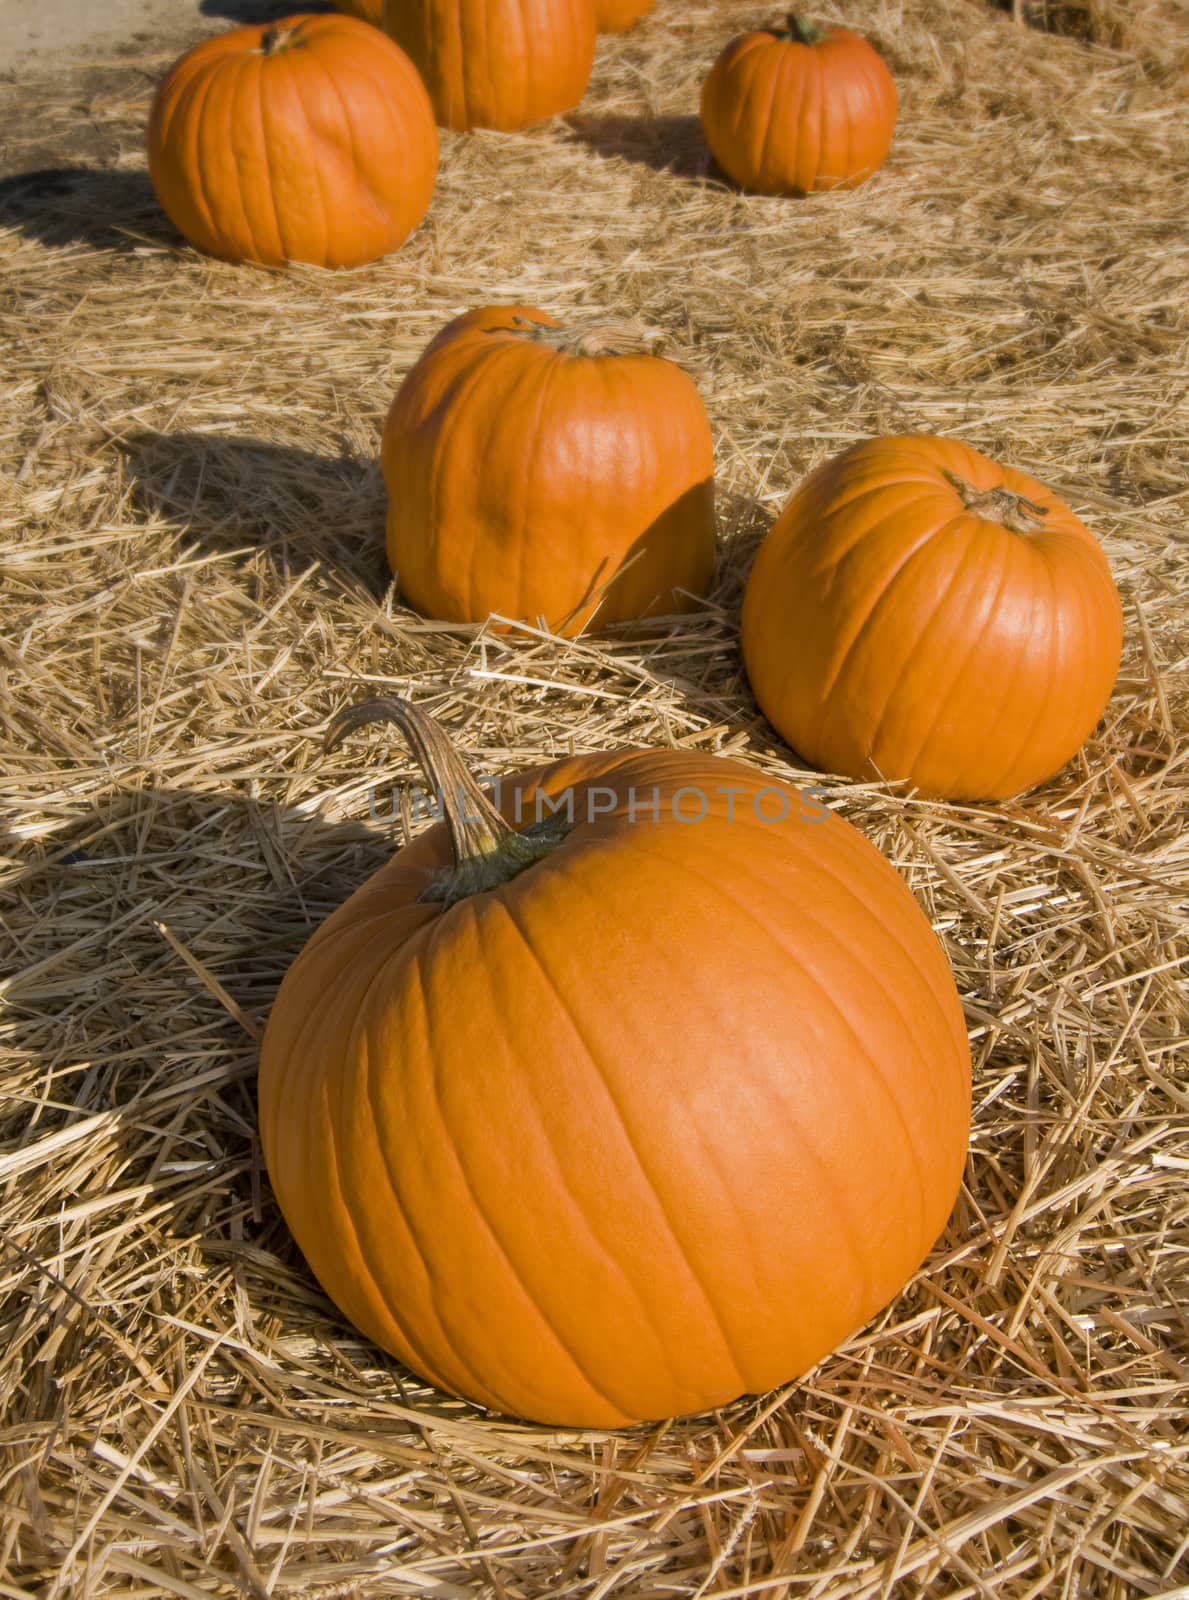 Large pumpkin from Fall harvest by Njean